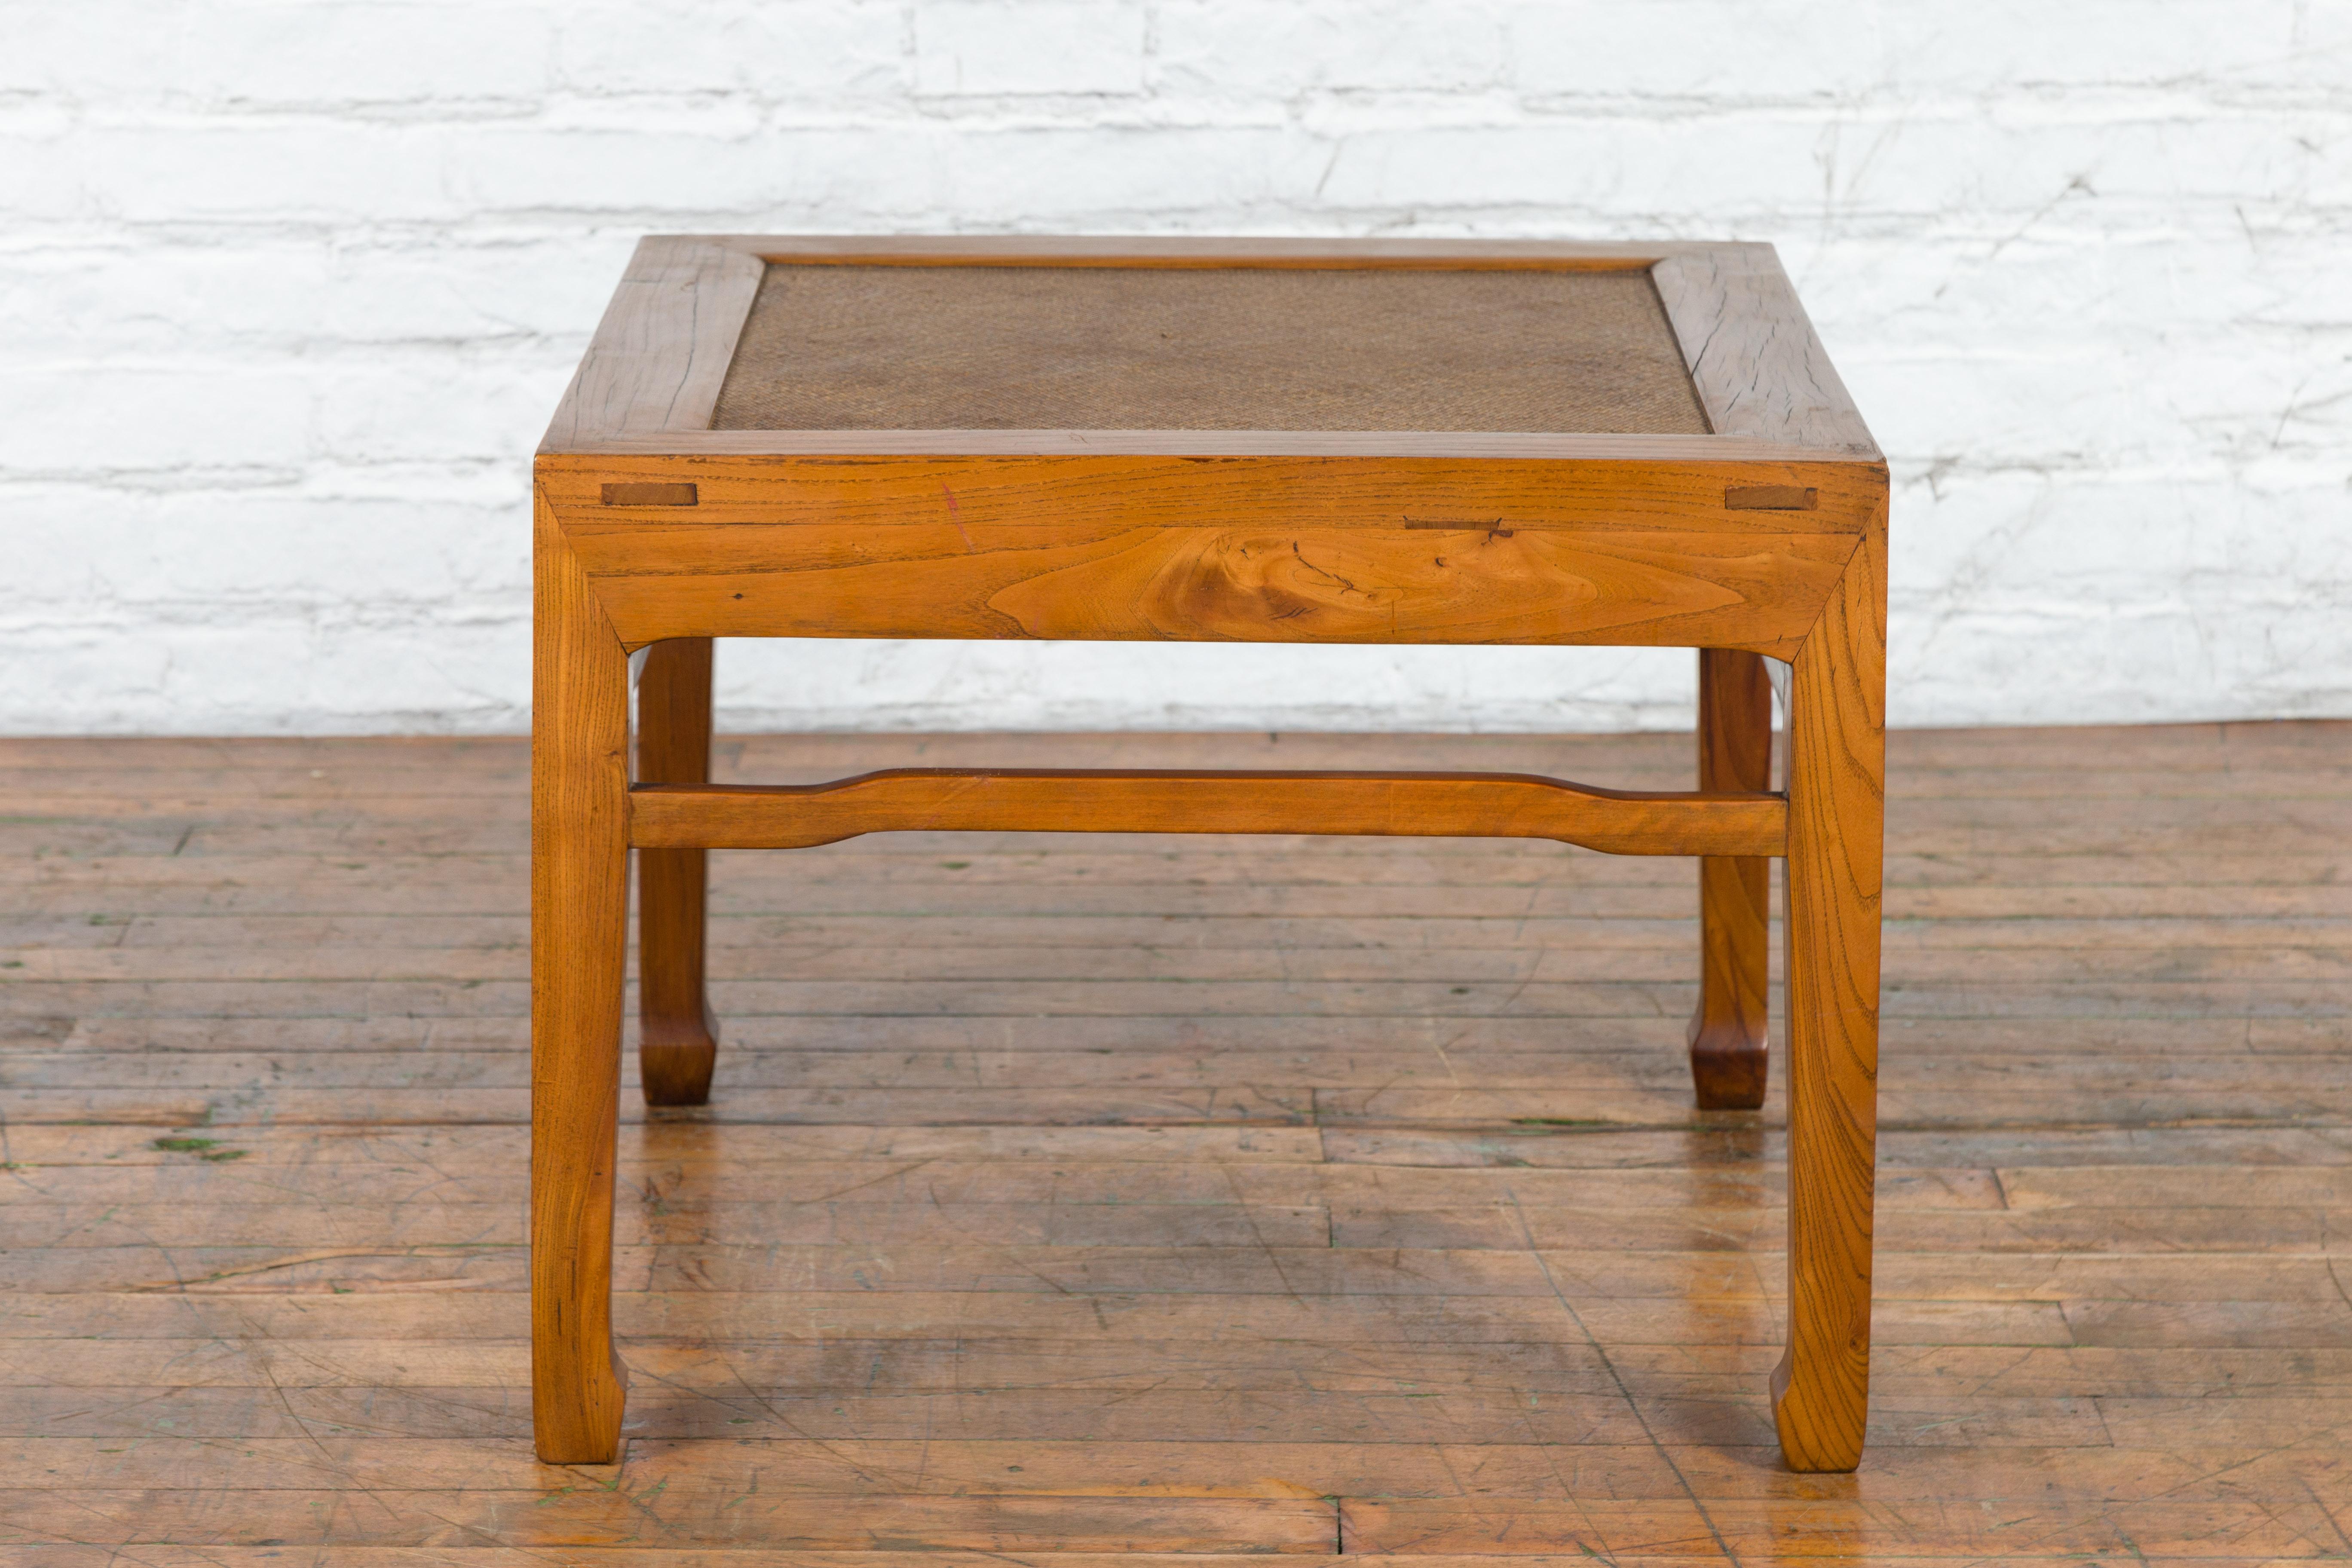 A Chinese Qing Dynasty period elm wood side table from the 19th century, with woven rattan top, humpback stretchers and horse hoof feet. Created in China during the Qing Dynasty period in the 19th century, this elm wood side table features a square